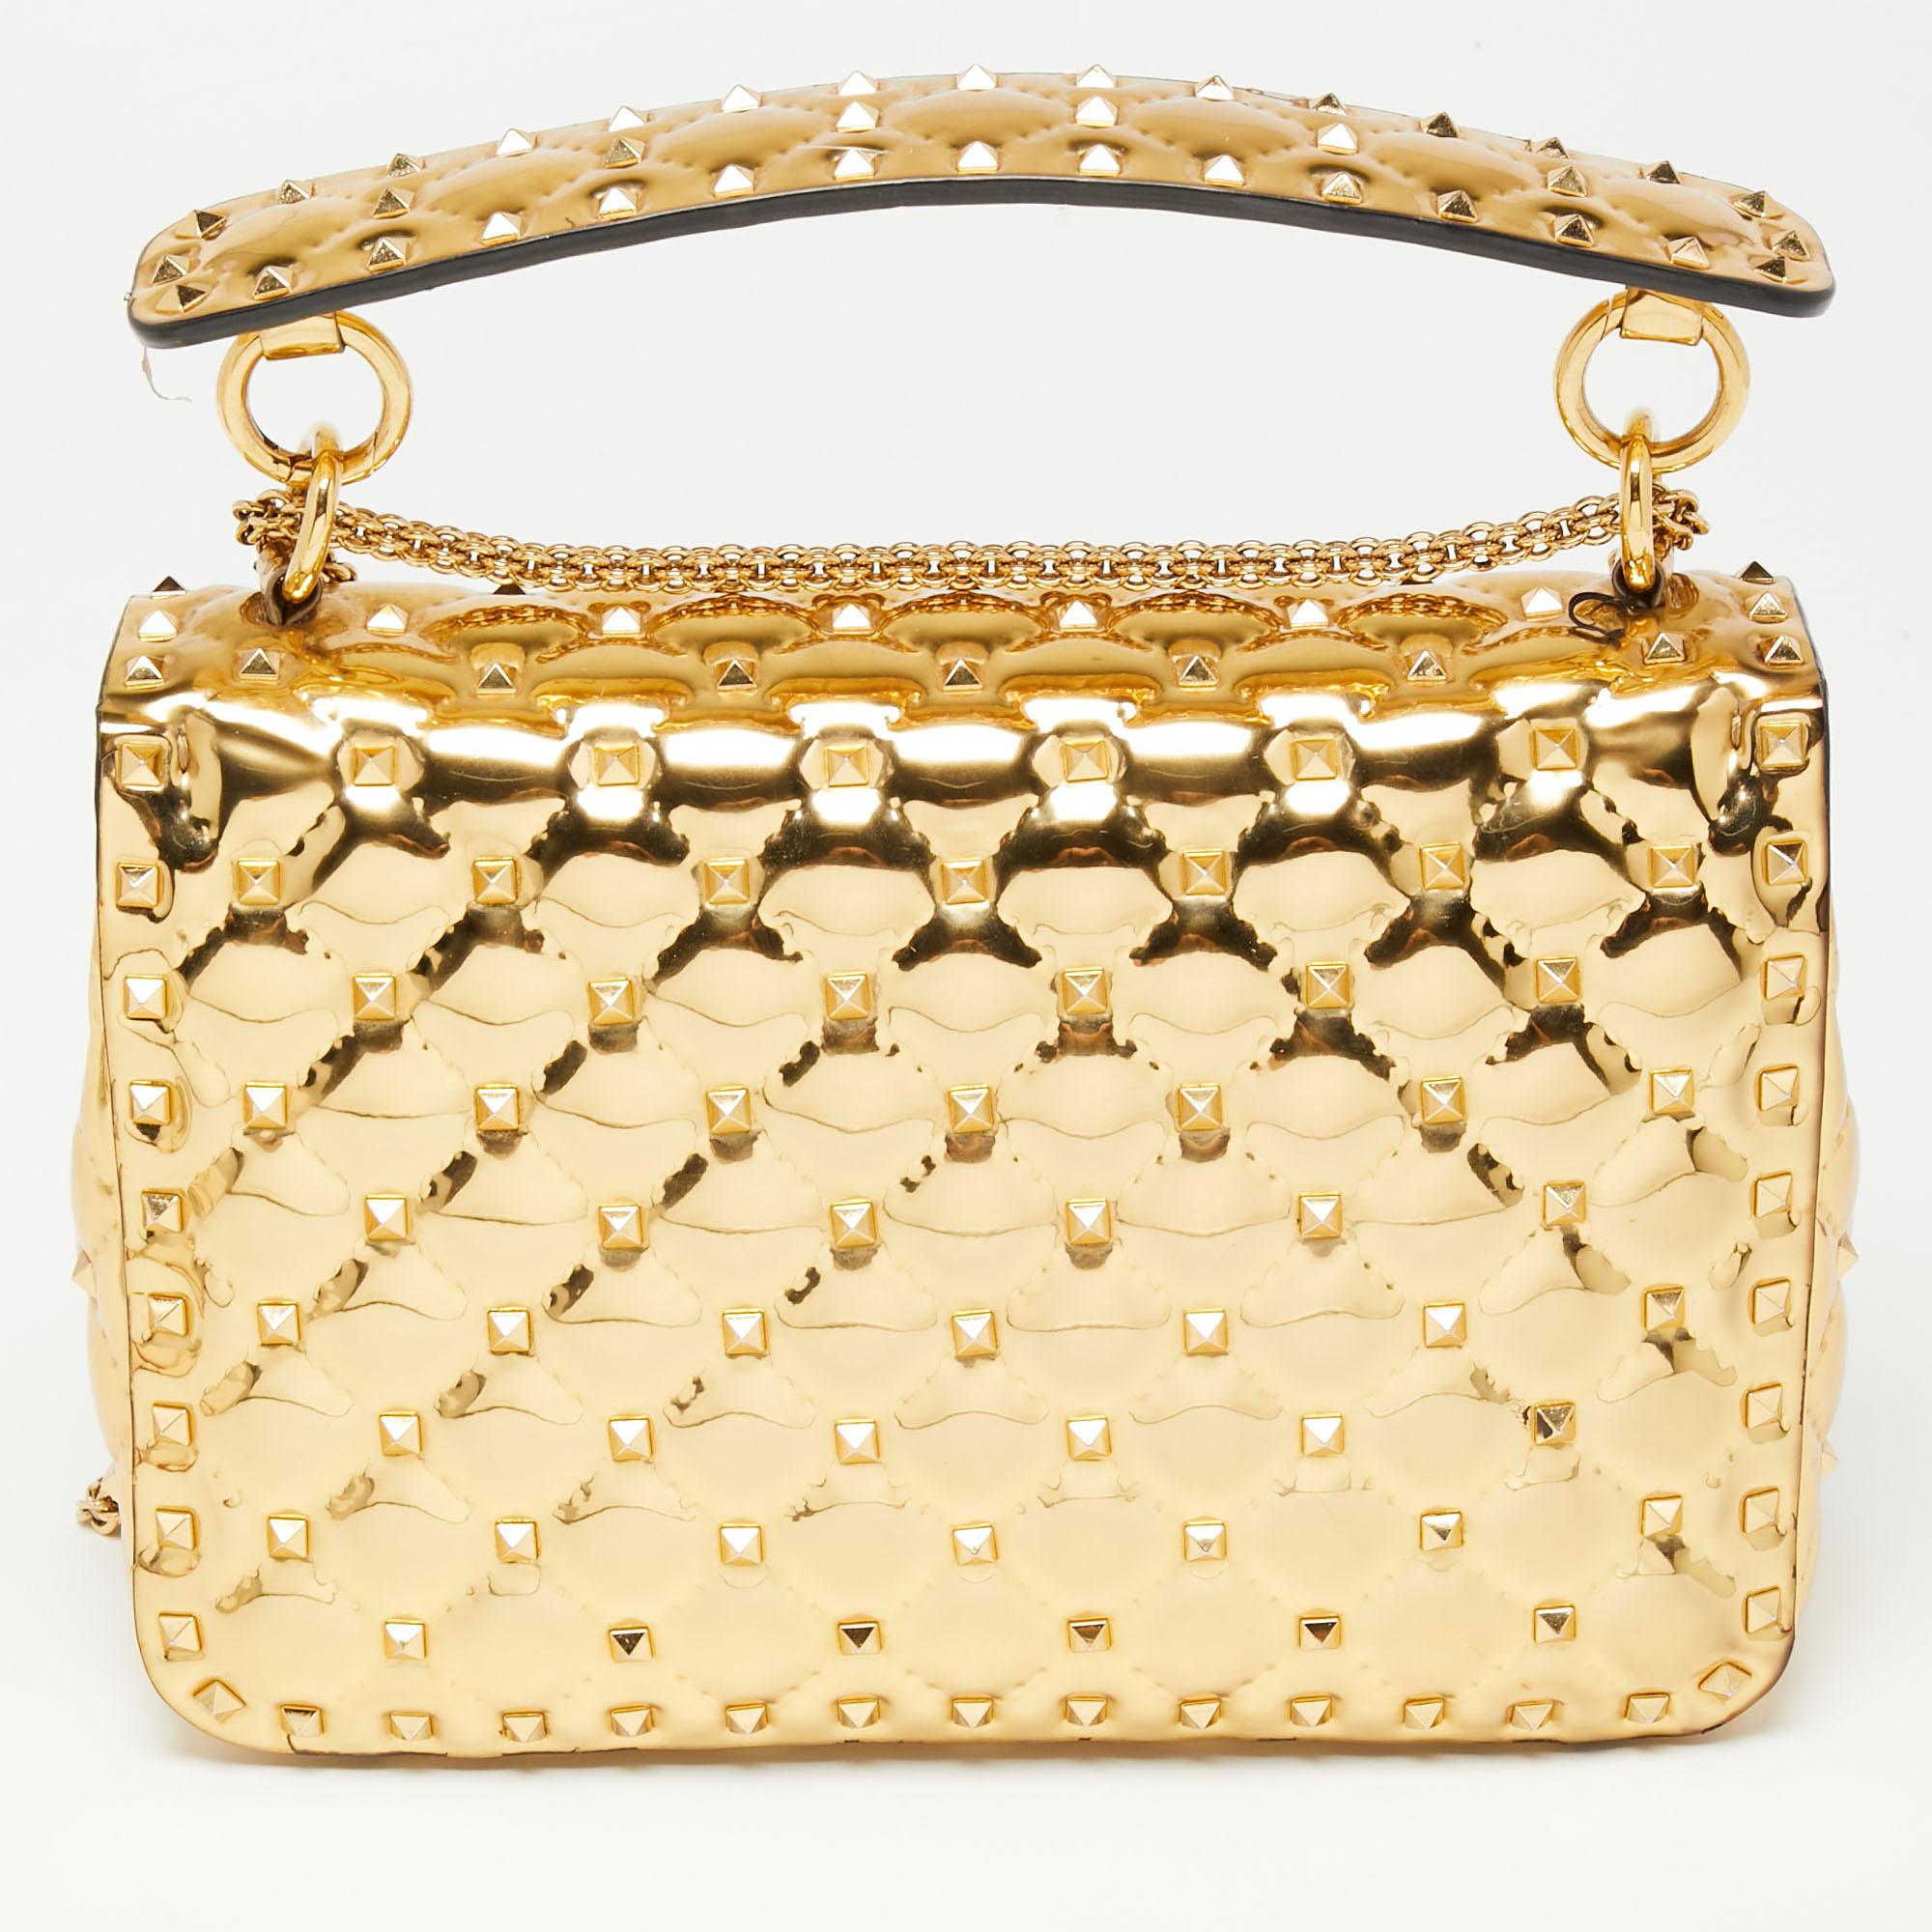 Let Valentino's fashion-forward aesthetic be the highlight of your look with this Rockstud Spike bag – note how the studs blend with the metallic gold patent leather. Crafted in Italy, it is perfectly shaped to easily house your everyday essentials